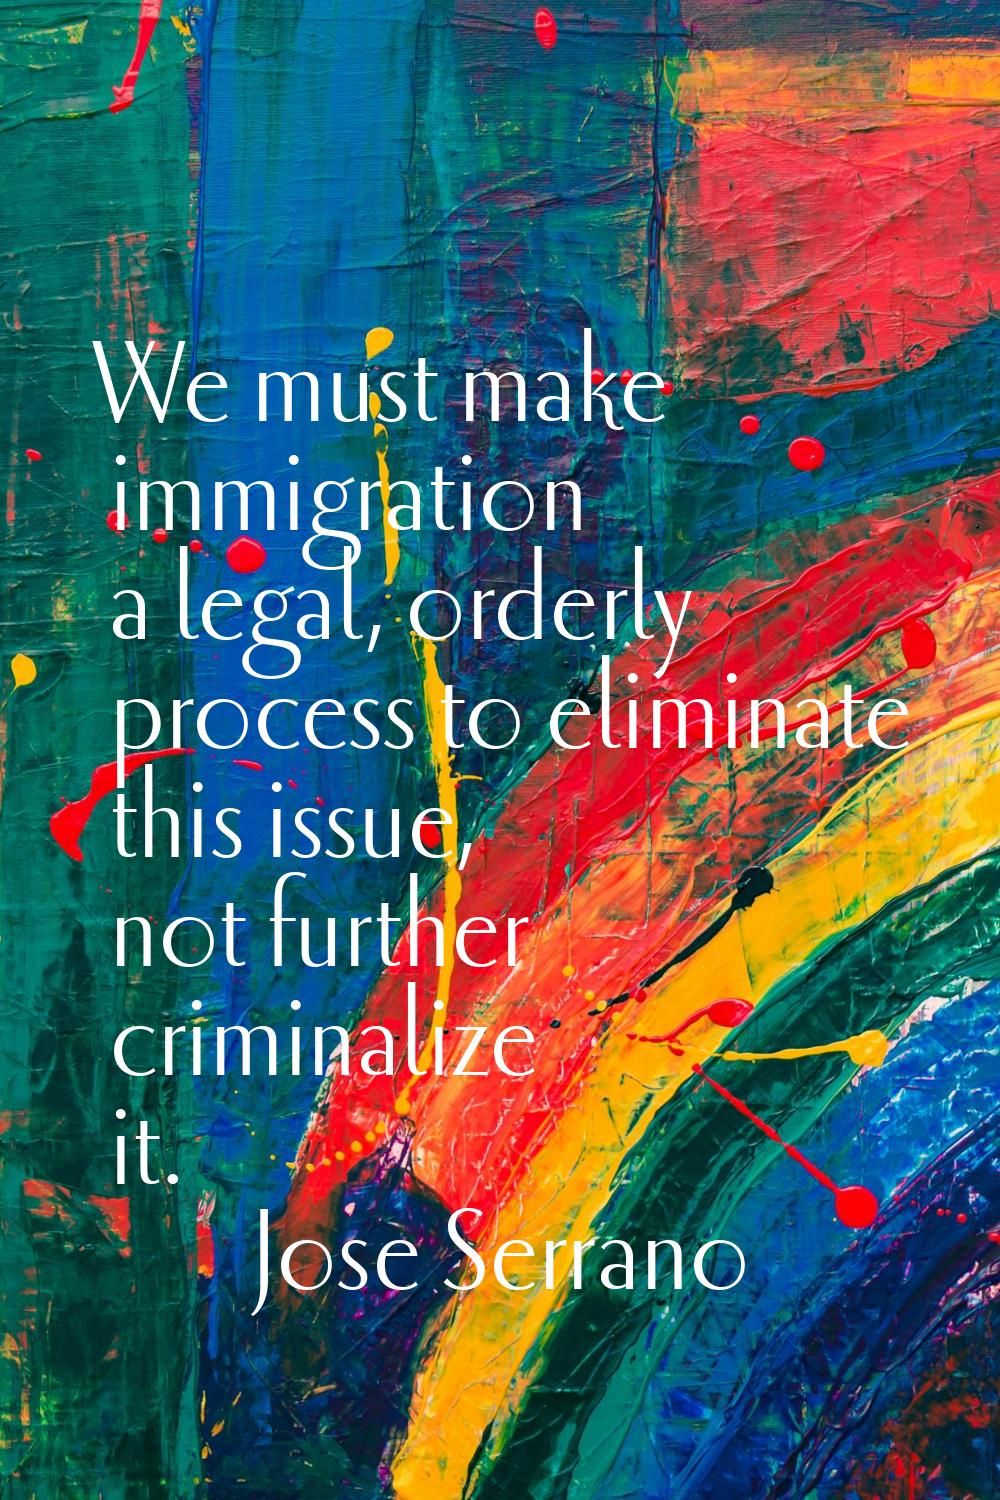 We must make immigration a legal, orderly process to eliminate this issue, not further criminalize 